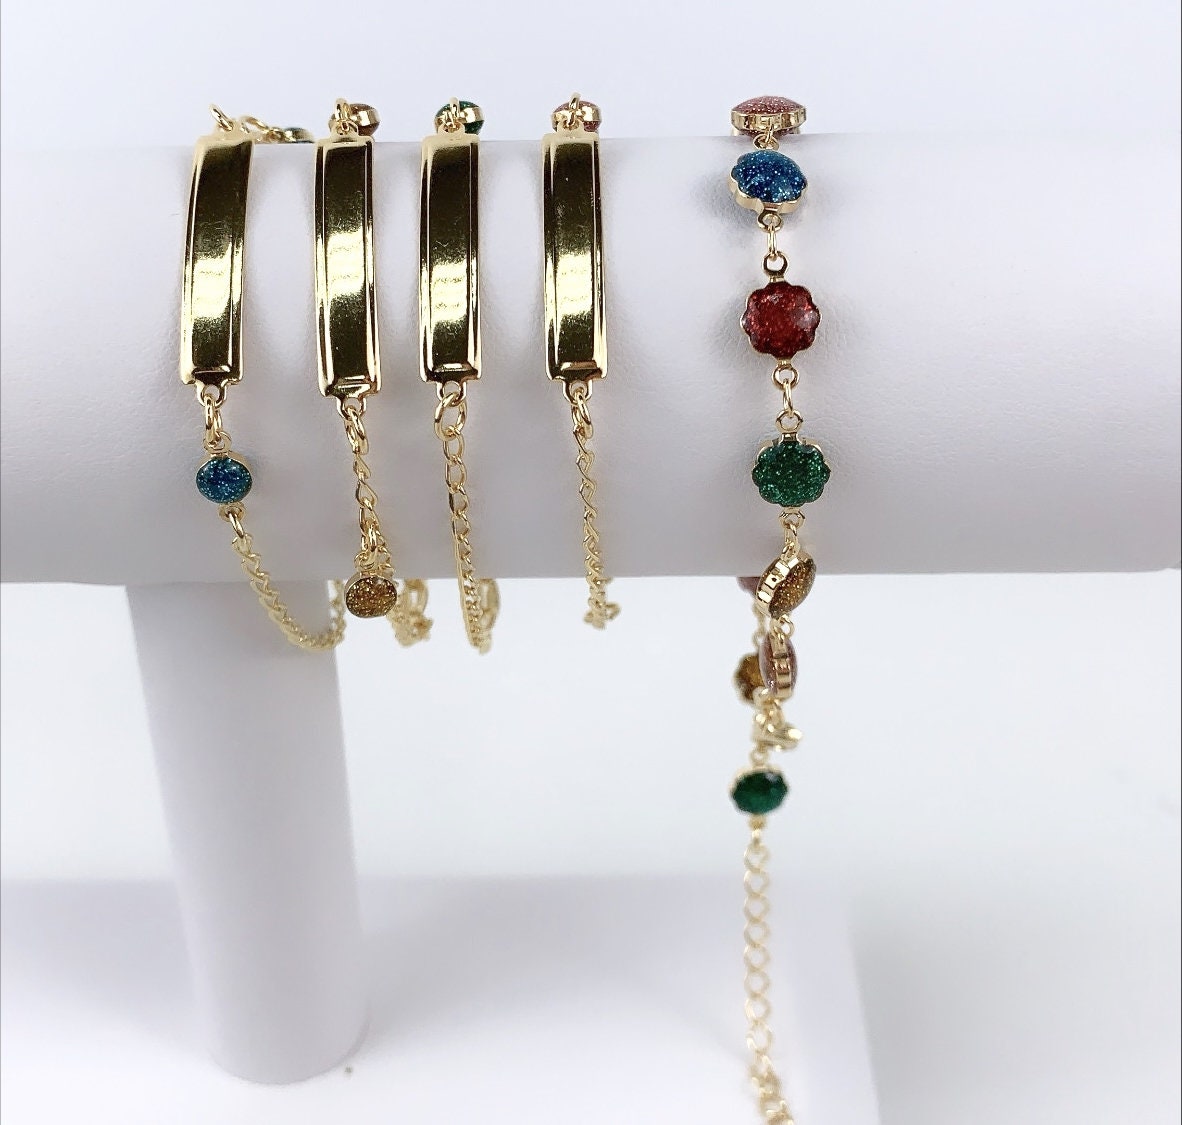 Mommy and Me Matching Jewelry | 18k Gold Filled Kids Bar Bracelet & Flowers Mother Bracelet for Wholesale Jewelry Supplies